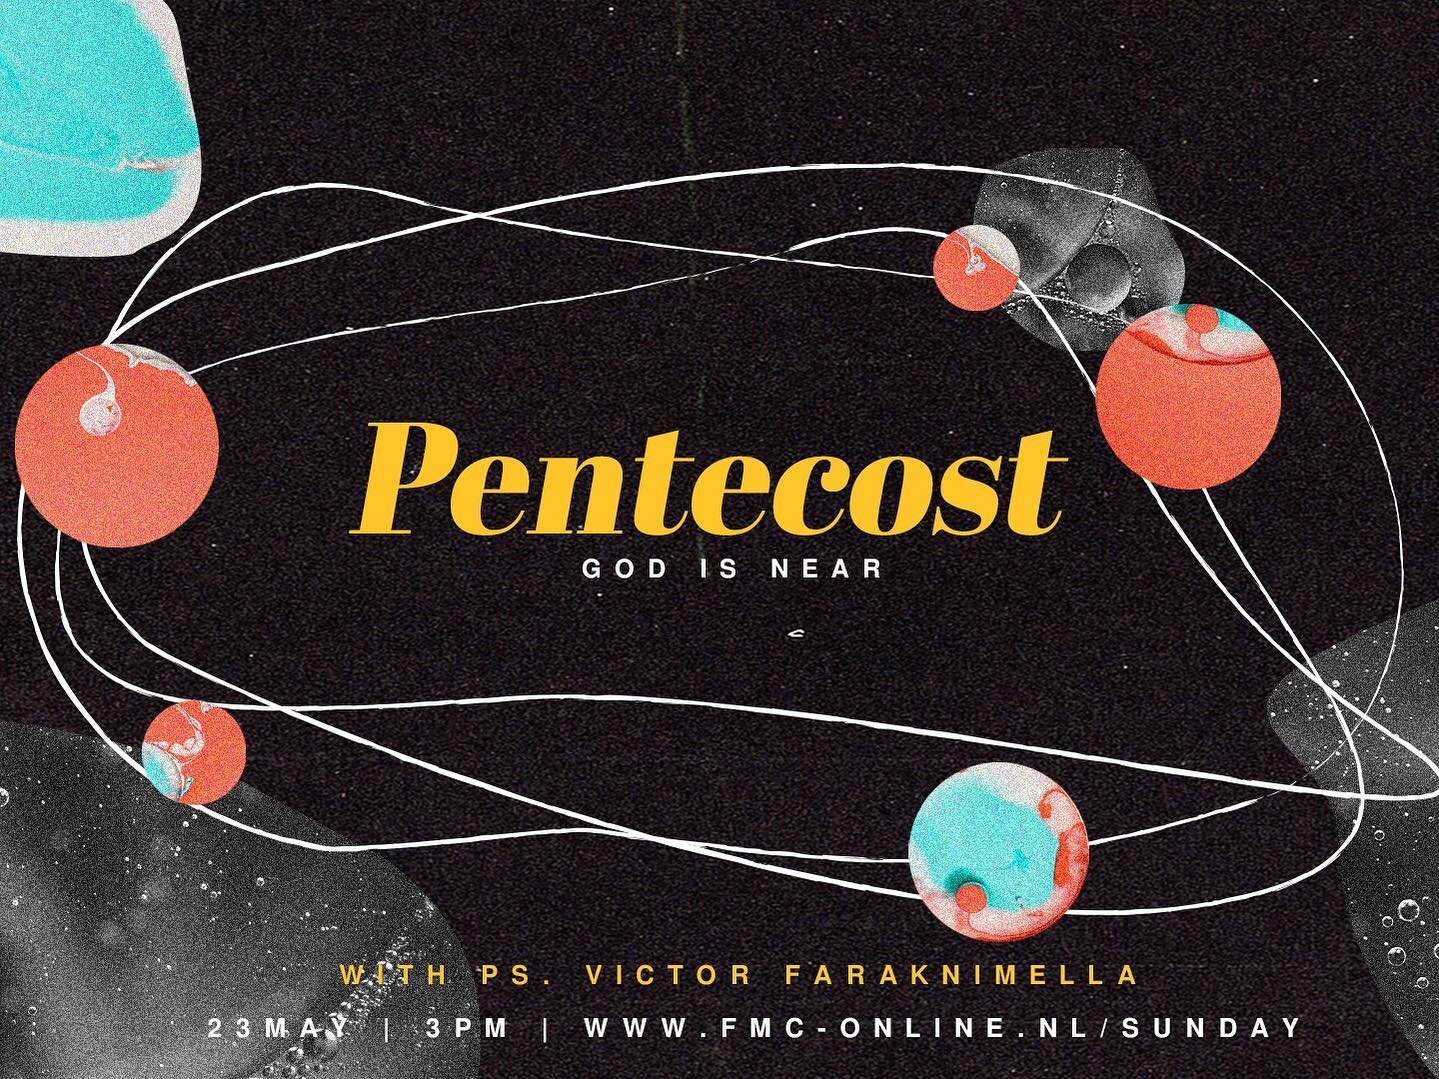 PENTECOST SUNDAY
God has poured out His Spirit upon us🔥 
Join us tomorrow and let&rsquo;s celebrate this together! 
Sunday 3PM, link in bio &gt;&gt;